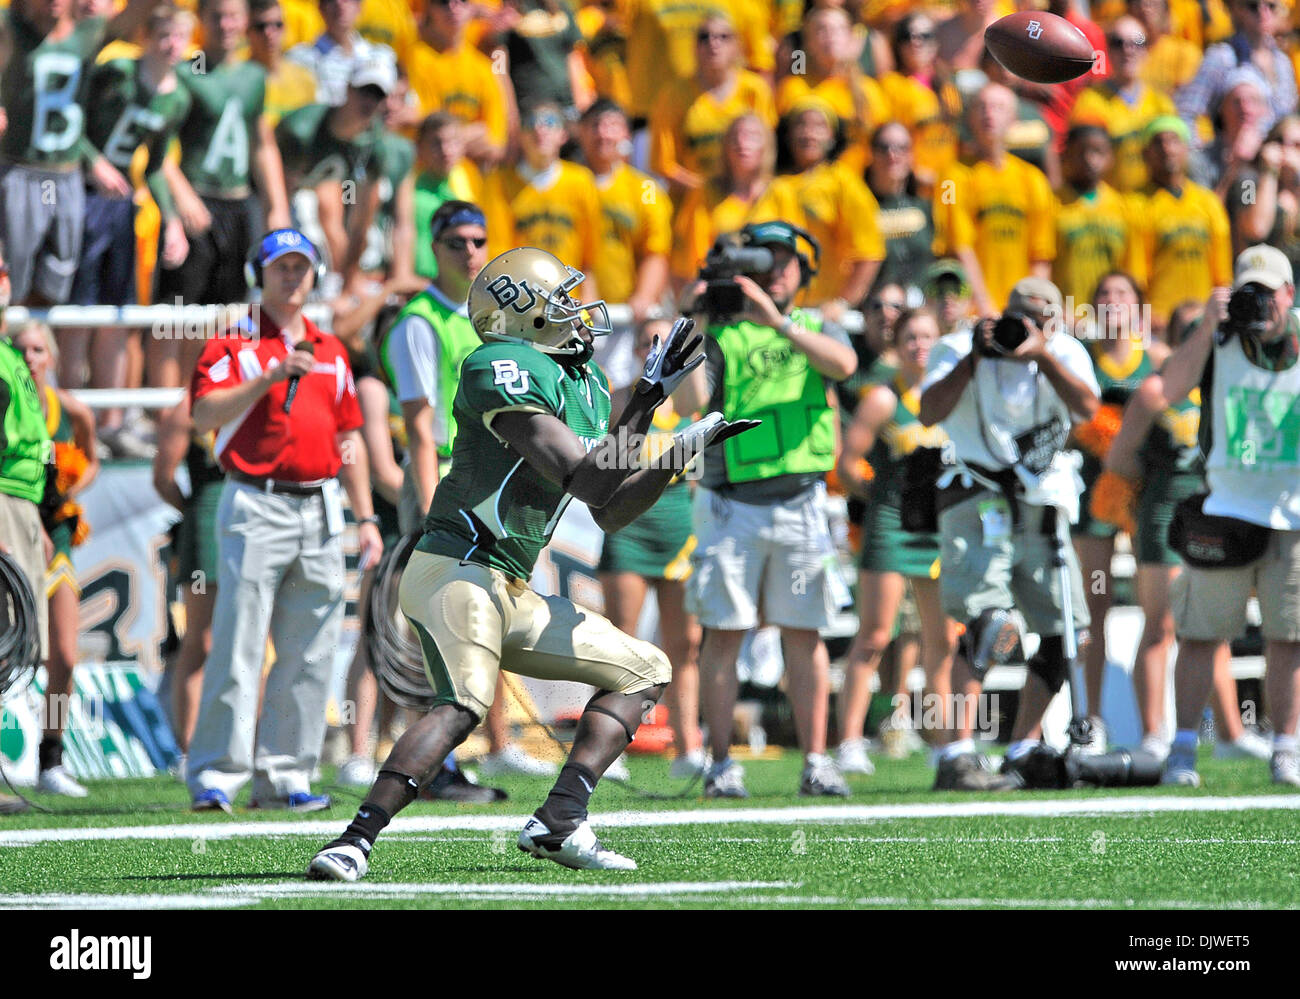 Oct. 2, 2010 - Waco, Texas, United States of America - Baylor Bears wide receiver Kendall Wright #1 makes a catch for a big gain in the fourth quarter of their game at Floyd Casey Stadium in Waco, Texas.  Baylor wins 55-7. (Credit Image: © Manny Flores/Southcreek Global/ZUMApress.com) Stock Photo